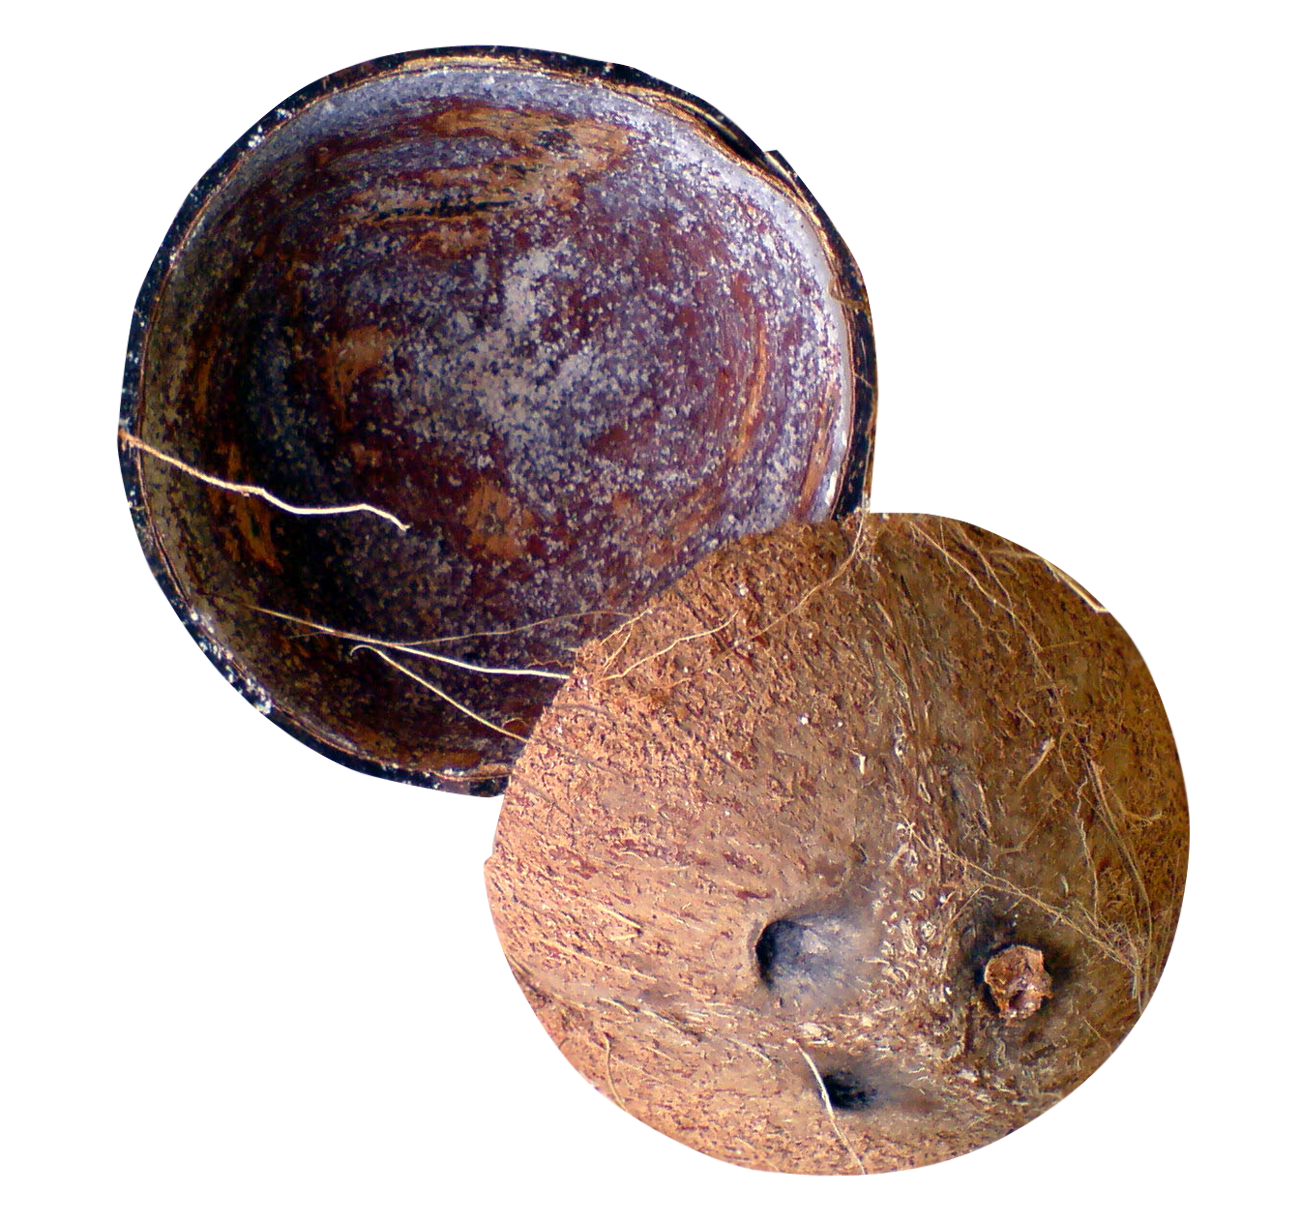 A Coconut Shell With A Hole In The Middle